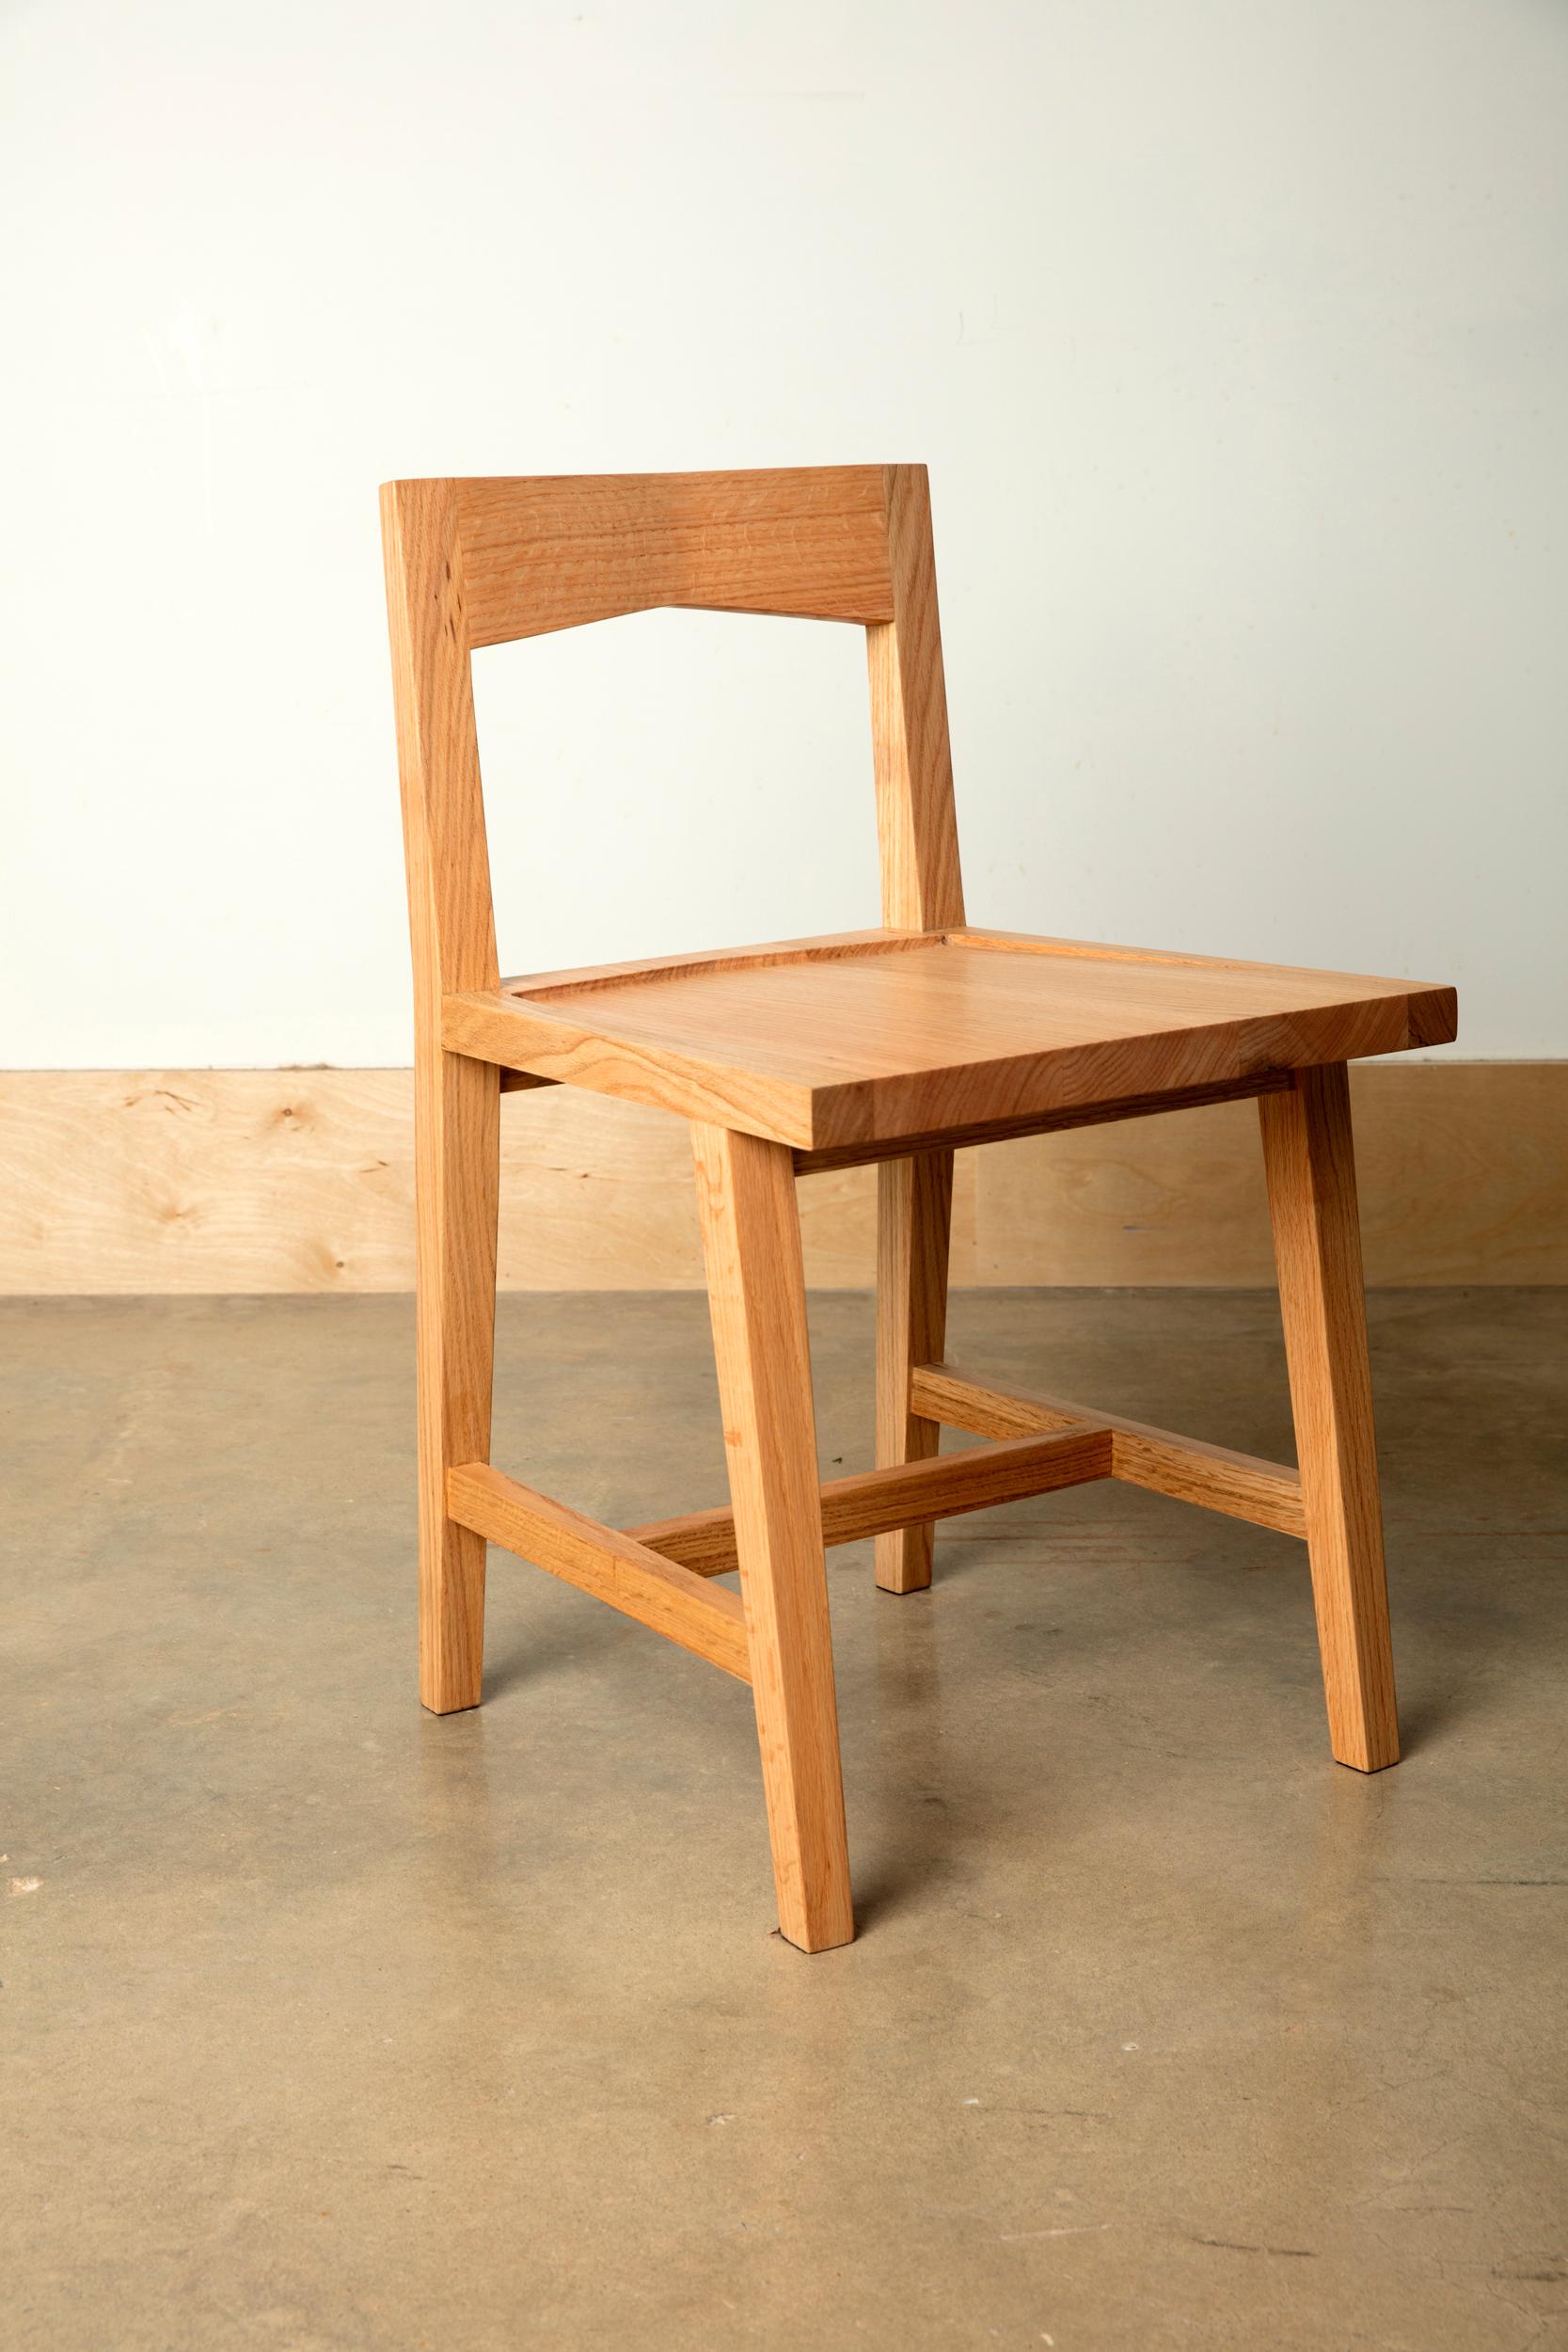 We handcraft this Classic natural oakwood writing desk and chair set with hardwoods from Birmingham's urban forest. For your home office, computer desk or a place to work from home, comfortable and focused, on a novel or a grocery list. Urban